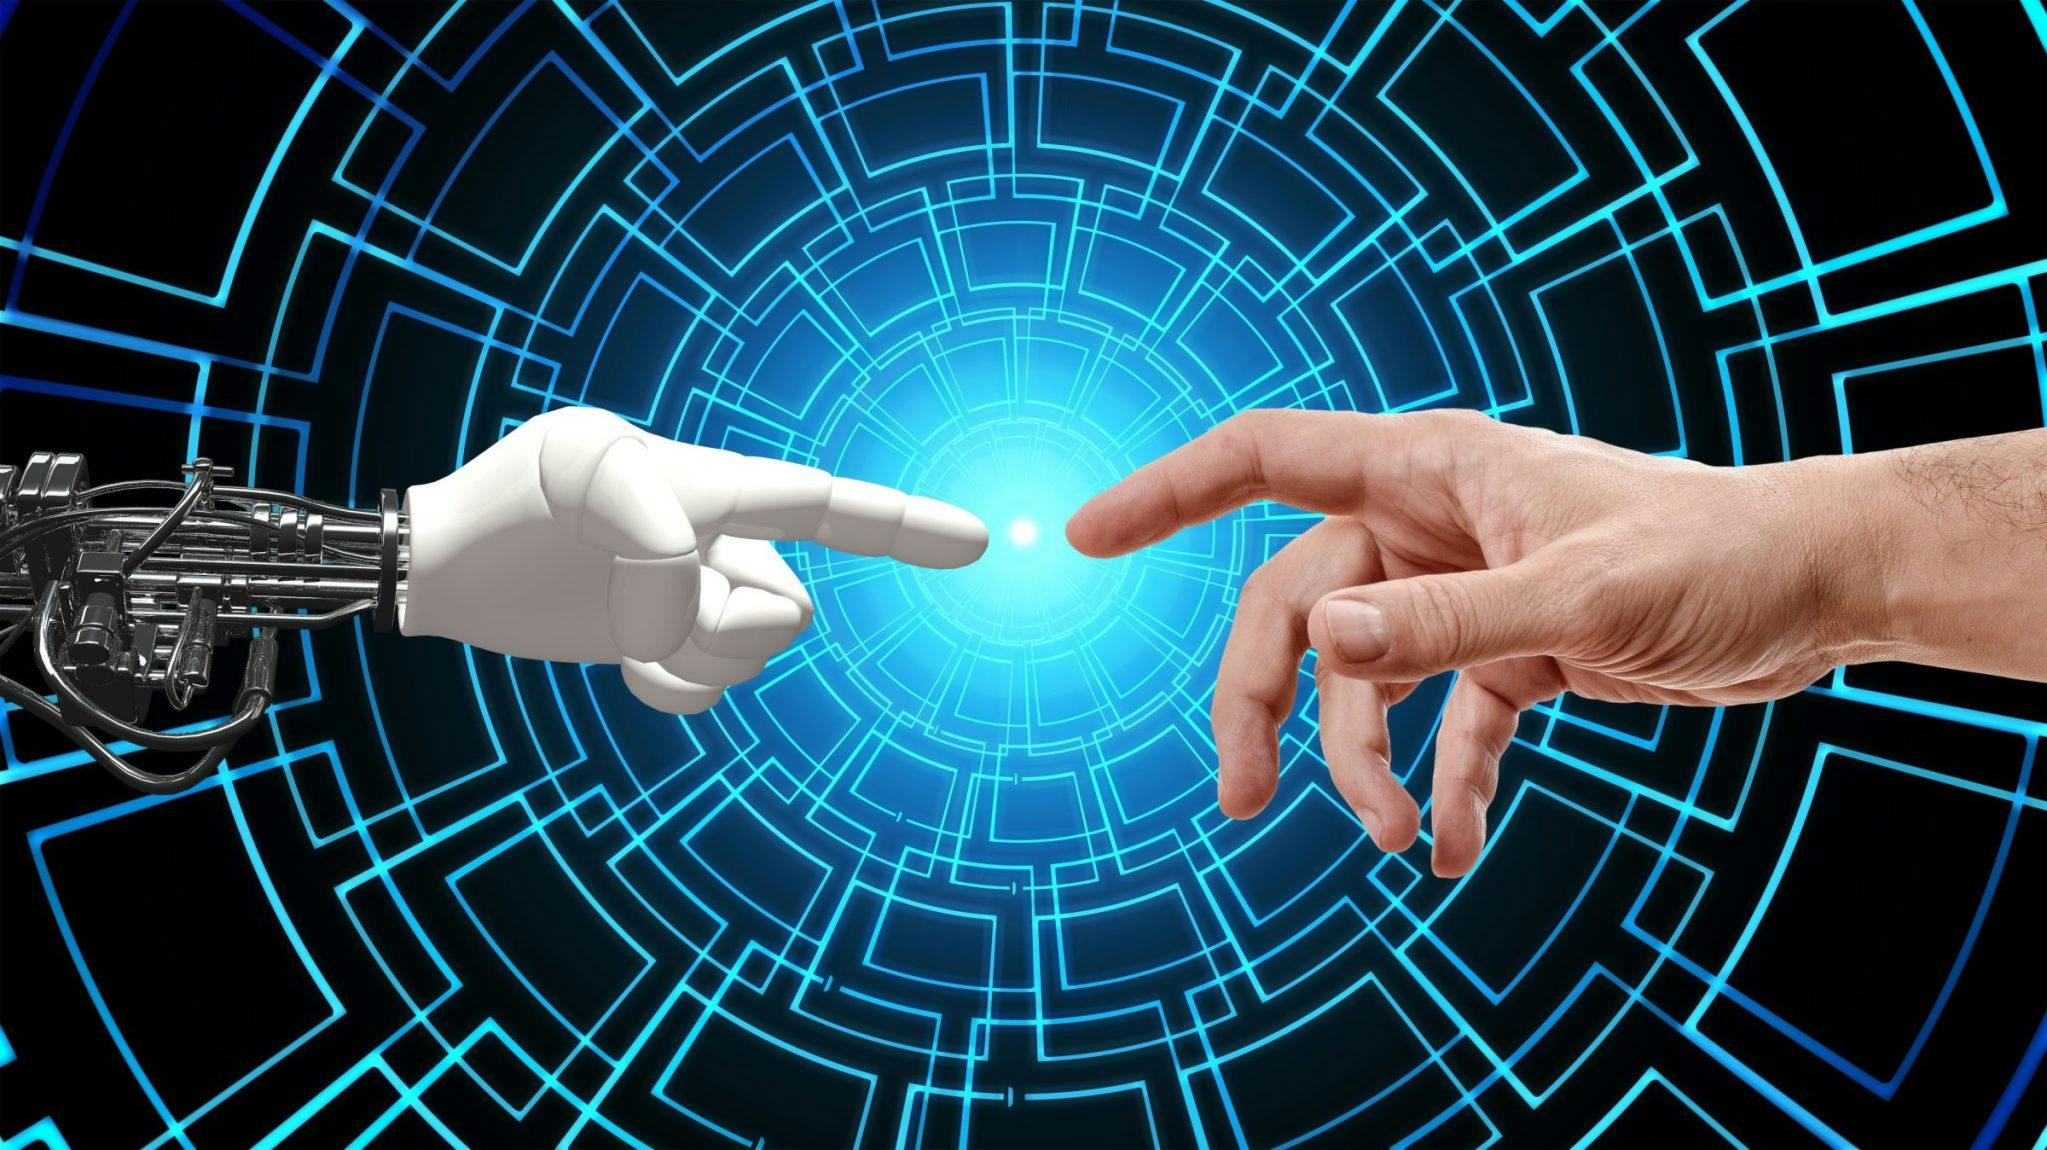 A robot ai voice hand reaching out to a freelancer human hand